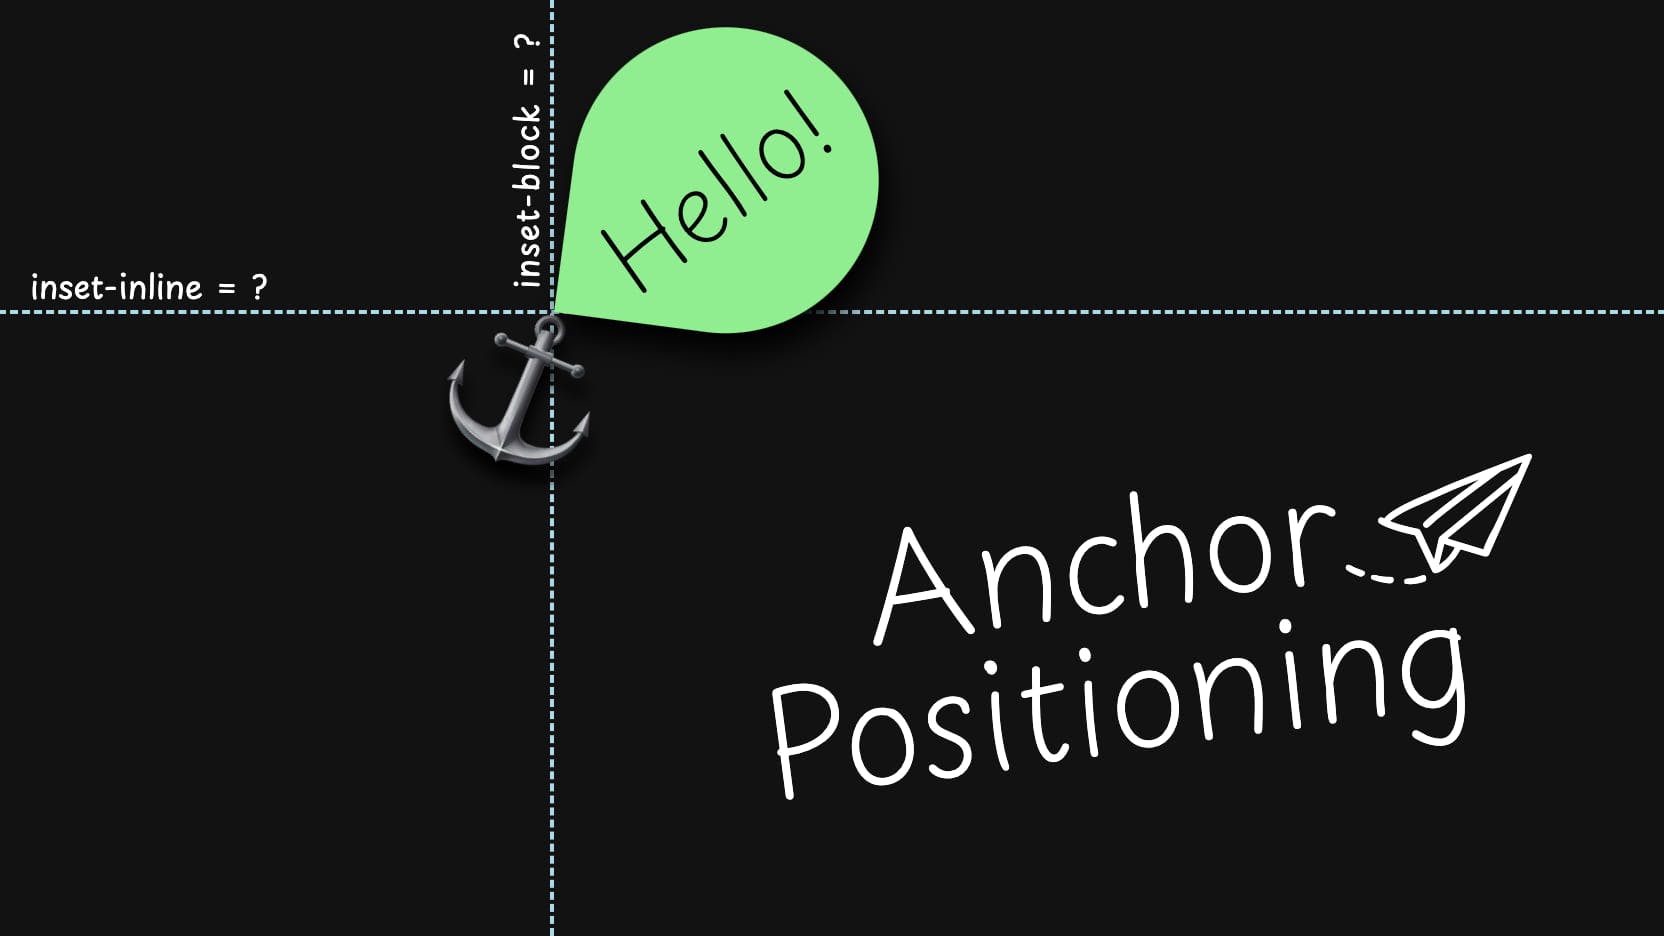 An illustration showing a big, slightly rotated anchor emoji on a black background with a green bubble pointing to it. The bubble contains the text “Hello!”. There are two light-blue dashed lines, one vertical and one horizontal, intersecting the point where the anchor and bubble touch. Above the horizontal line, there is an “inset-inline = ?” text, and on a side of the vertical one there is “inset-block = ?”. In the bottom-right section of the illustration, the text “Anchor Positioning” is written in a bigger font over two slightly rotated lines. An icon of a paper airplane with a dashed line after it is placed on the right of the word “Anchor”, as if launched by it.